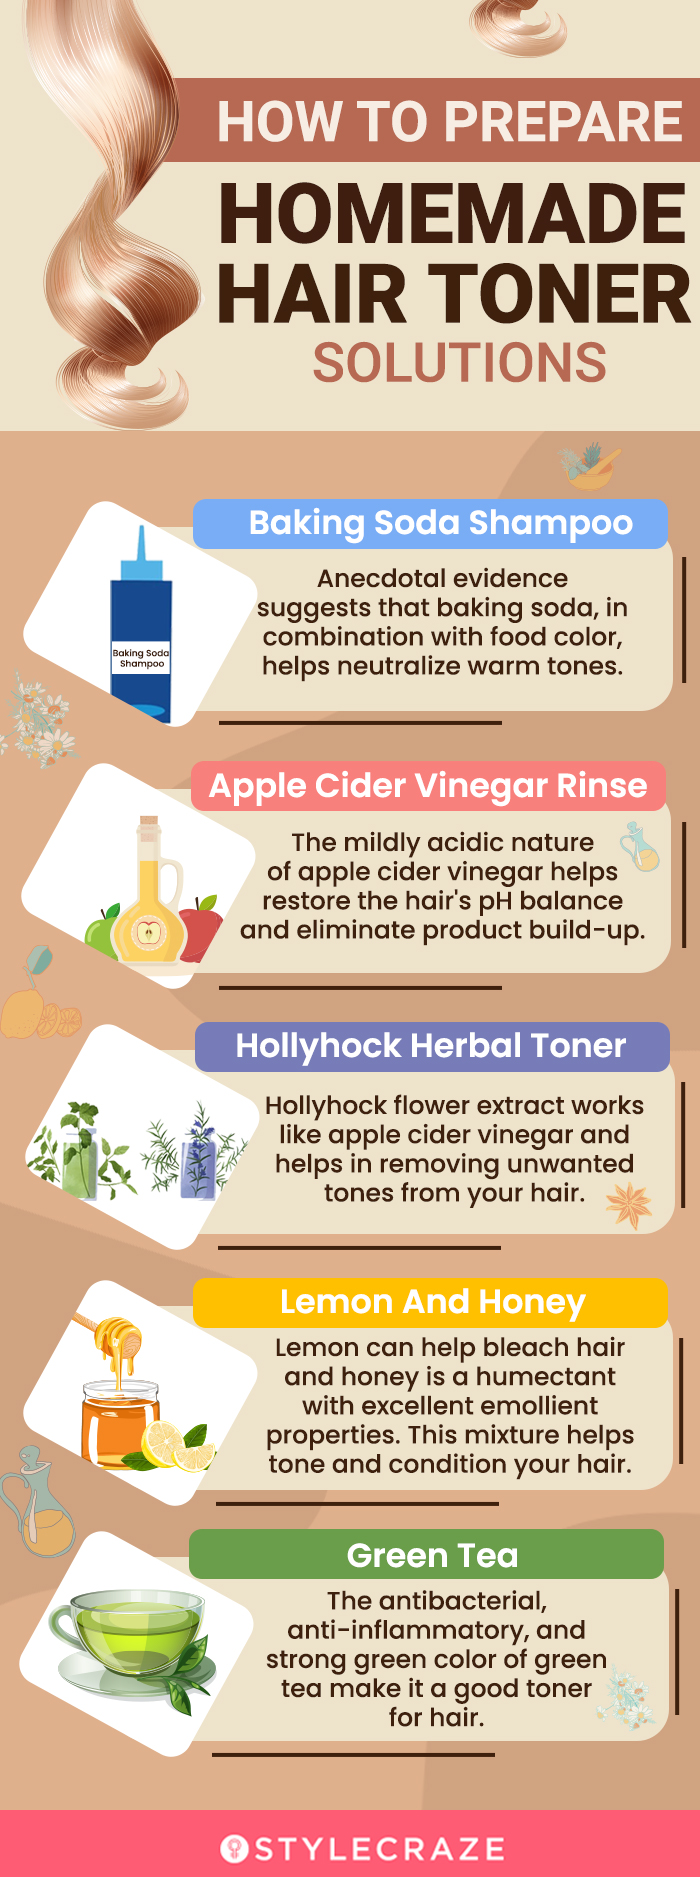 how to prepare homemade hair toner solutions [infographic]